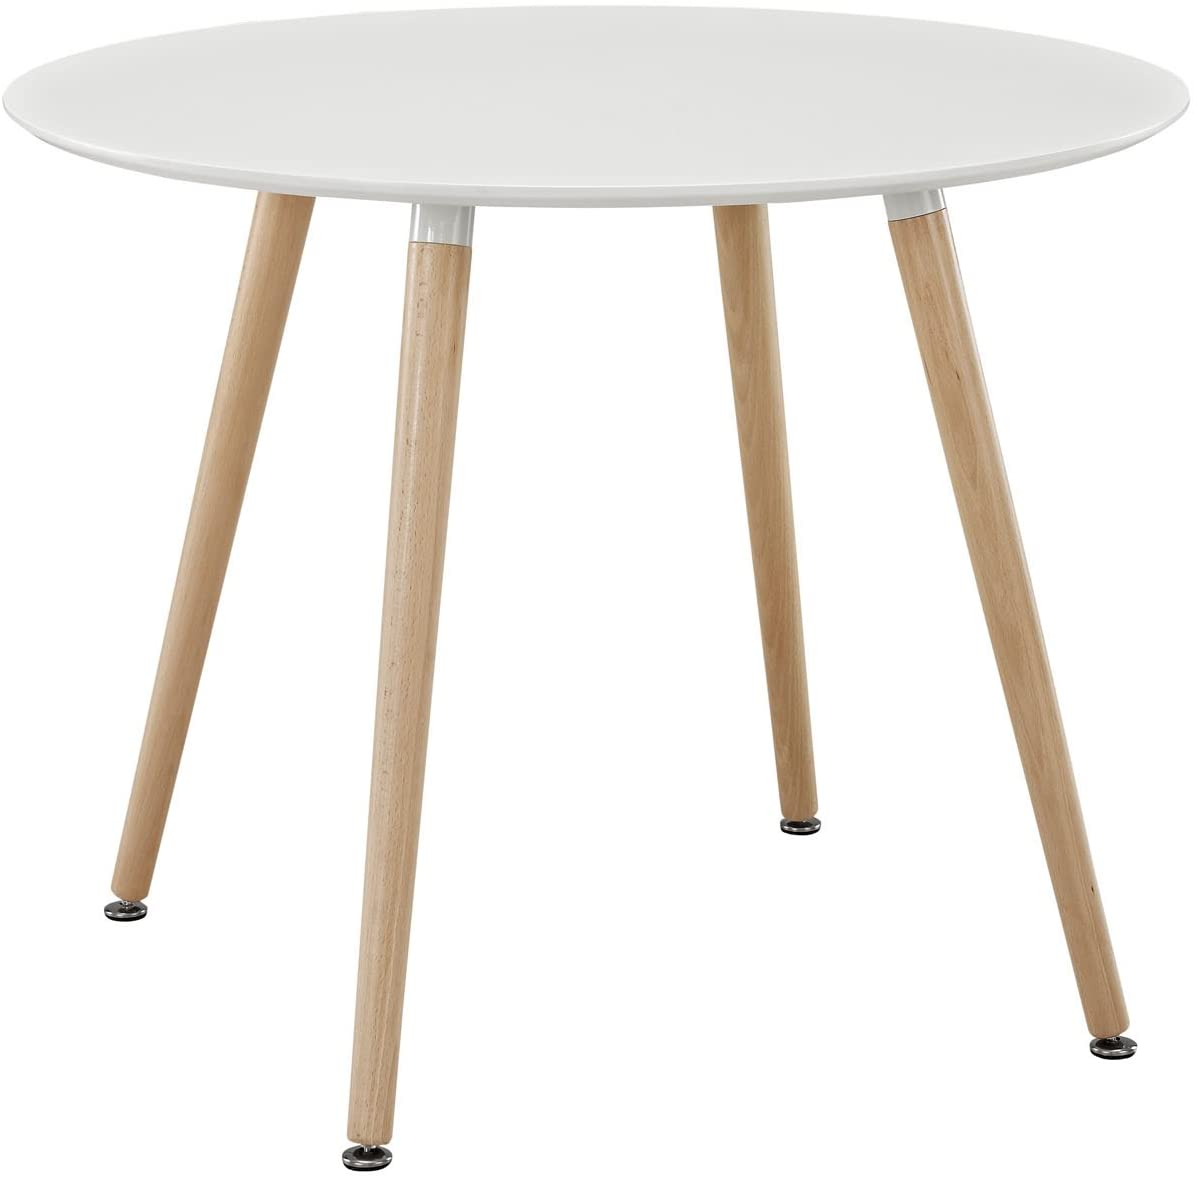 B00I52XIDQ Modway Track 36" Contemporary Modern Round Kitchen and Dining Room Table in White